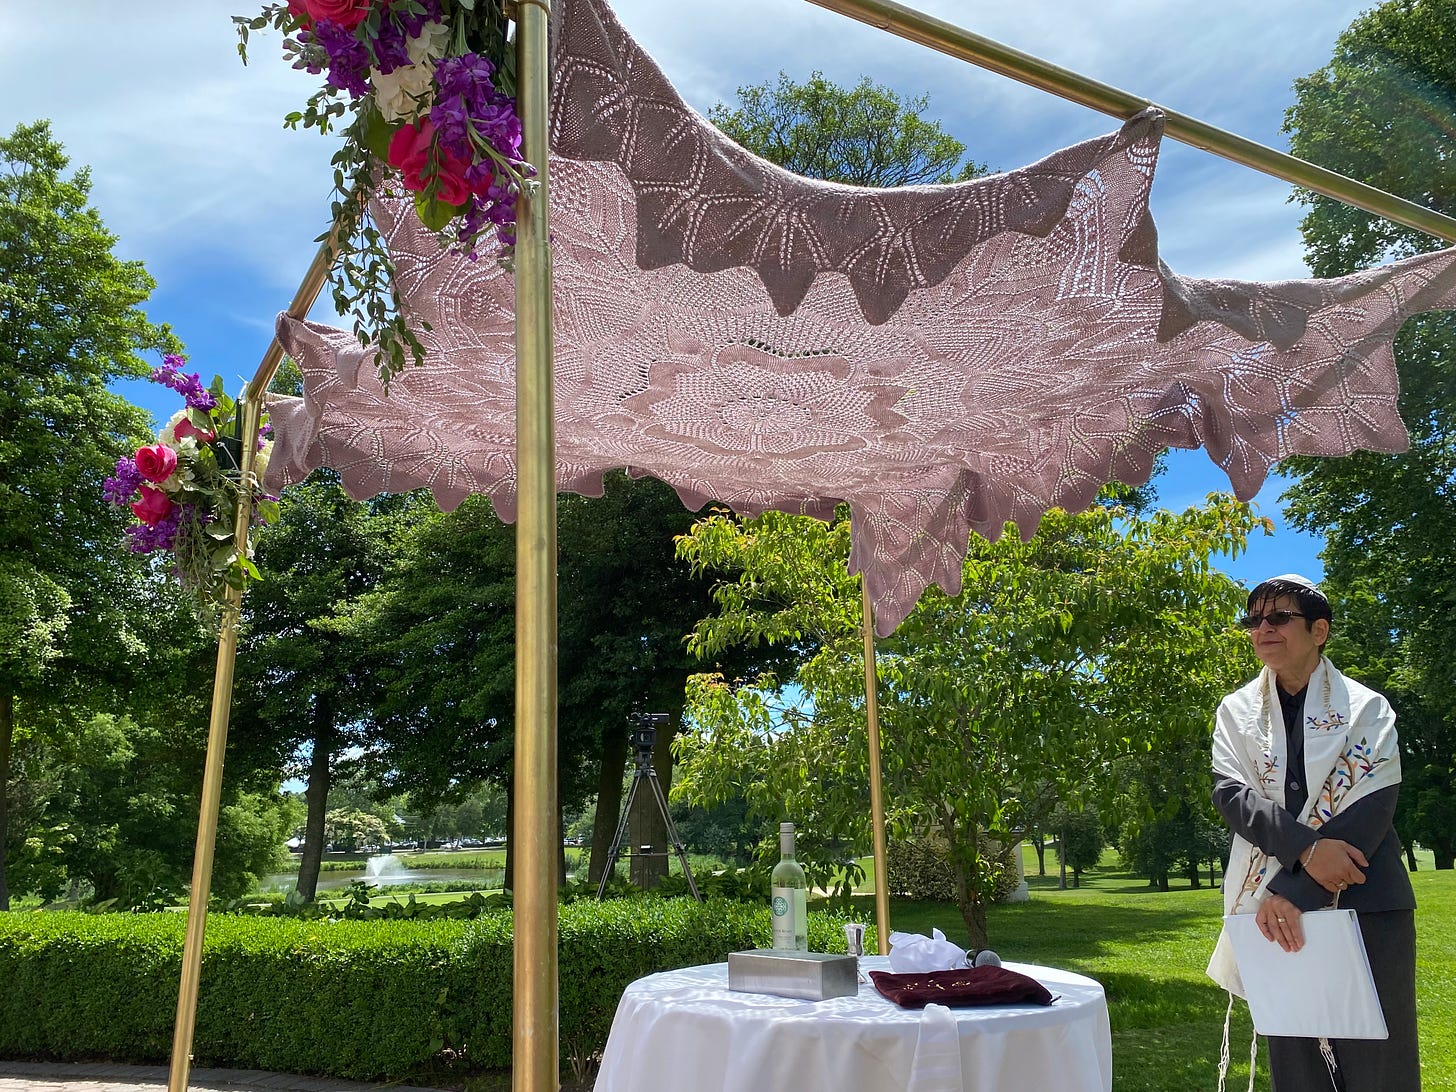 Dr. Brink knit this beautiful dusty rose chuppah for her recent wedding.